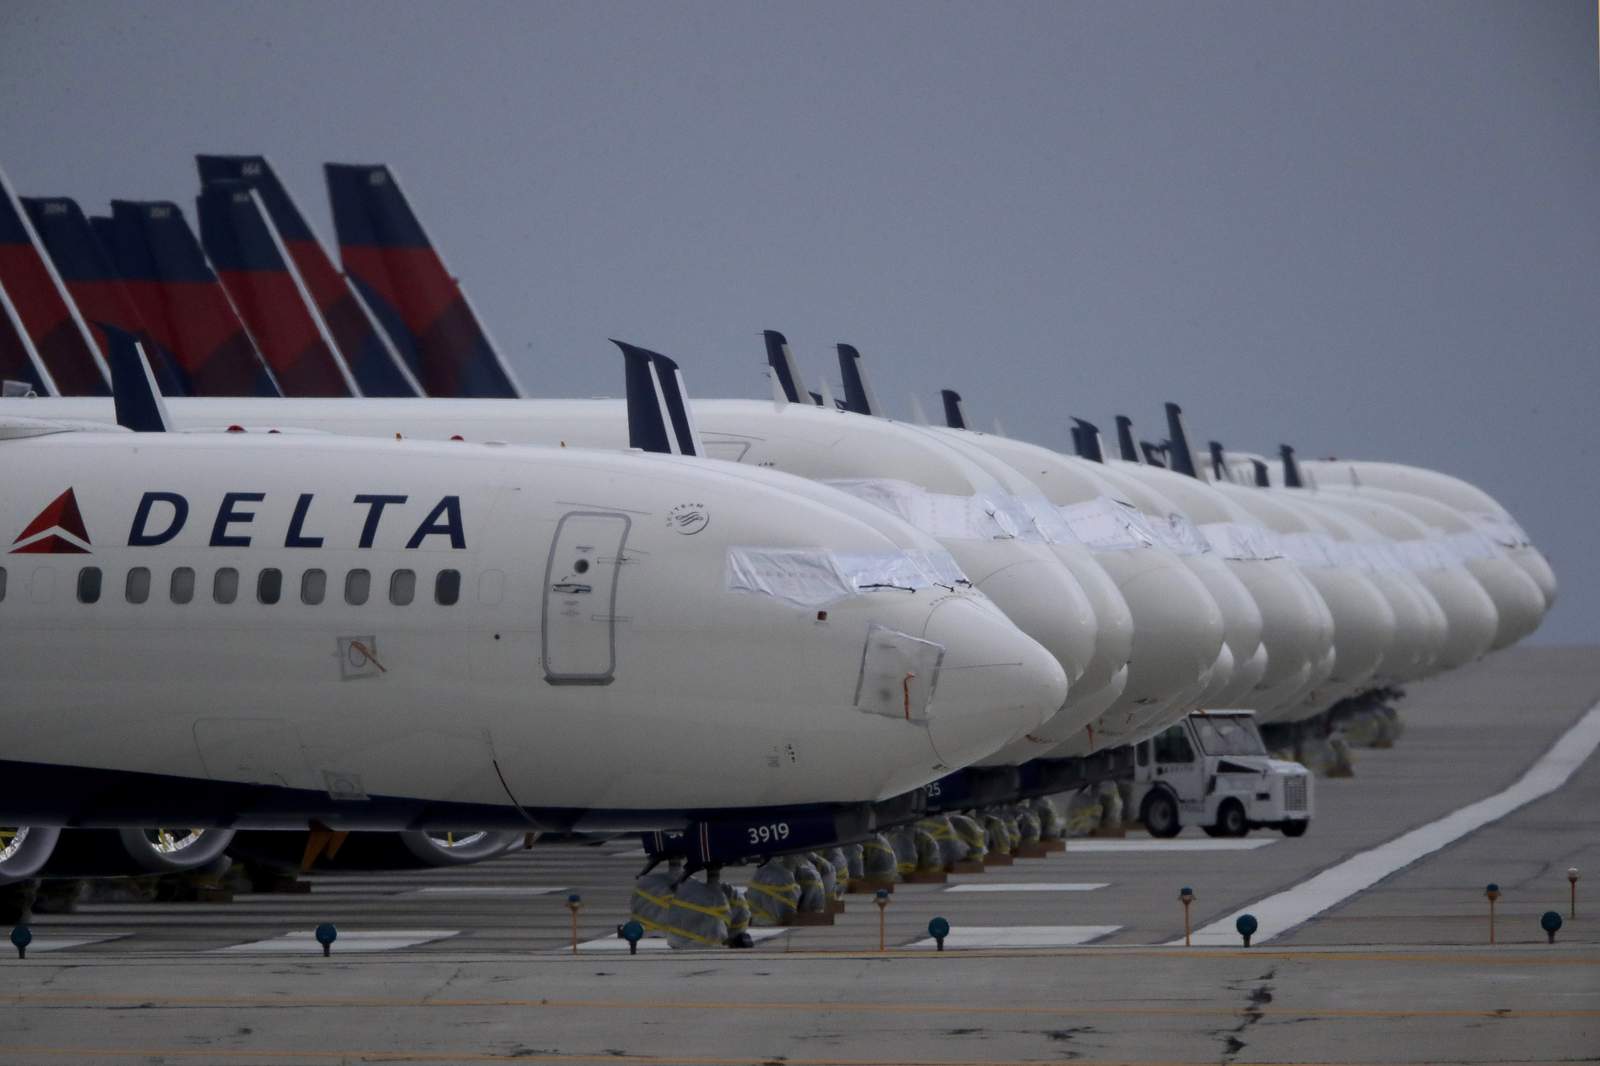 A $1.2 billion loss for Delta, but recovery is on the radar